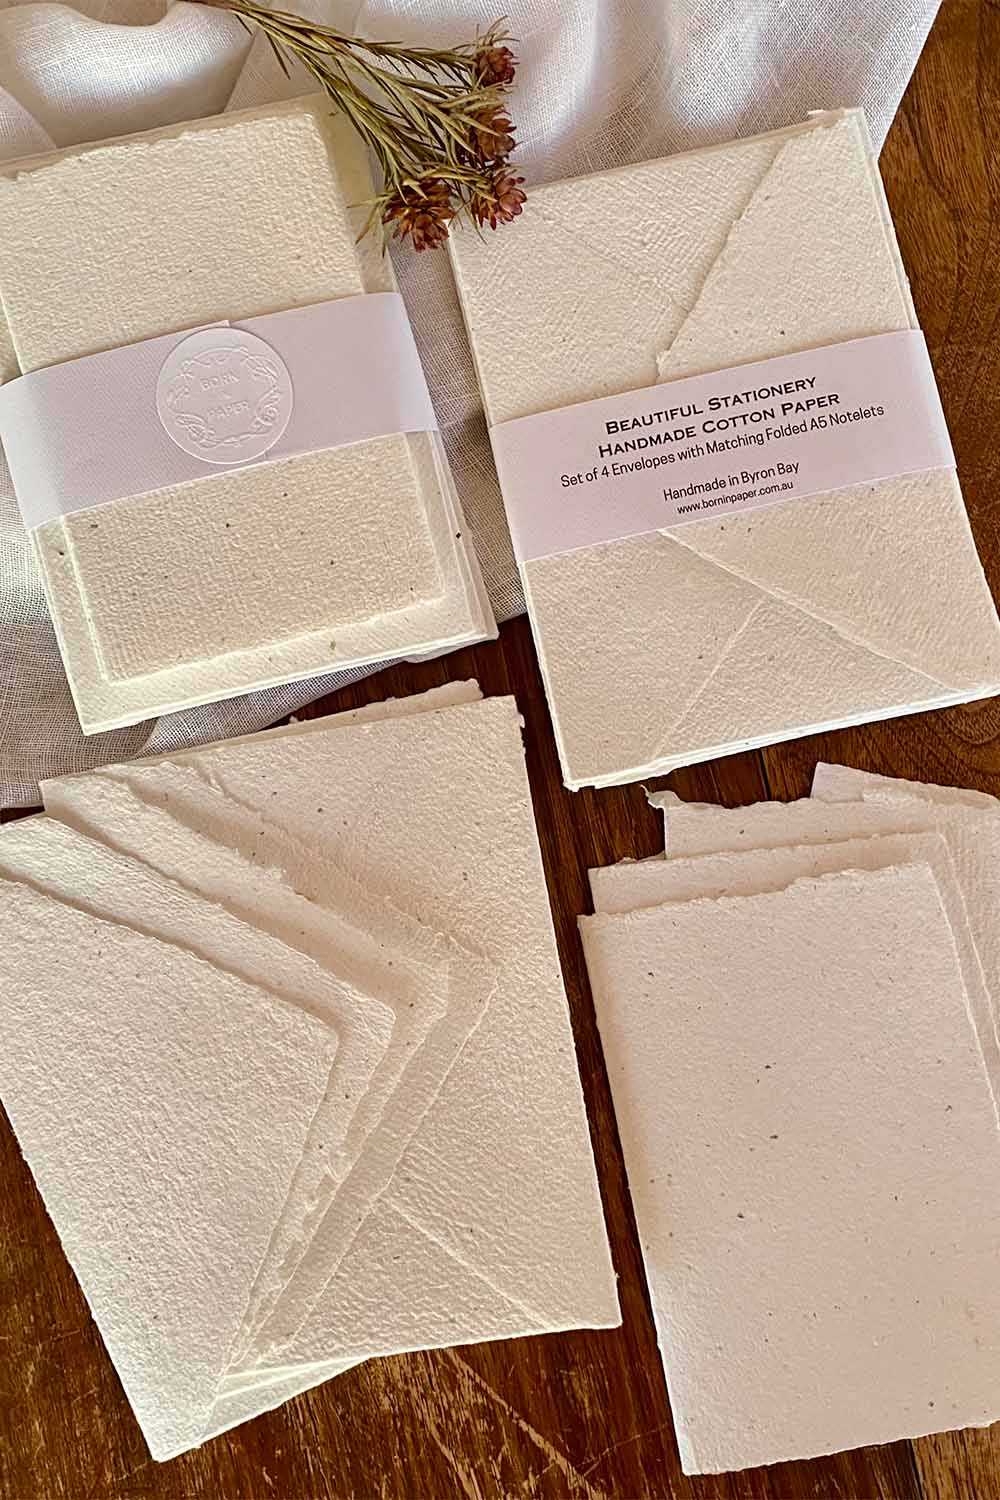 Handmade paper stationary. Set of 4 envelopes with matching folded A5 notelets. Handmade in Byron Bay Australia